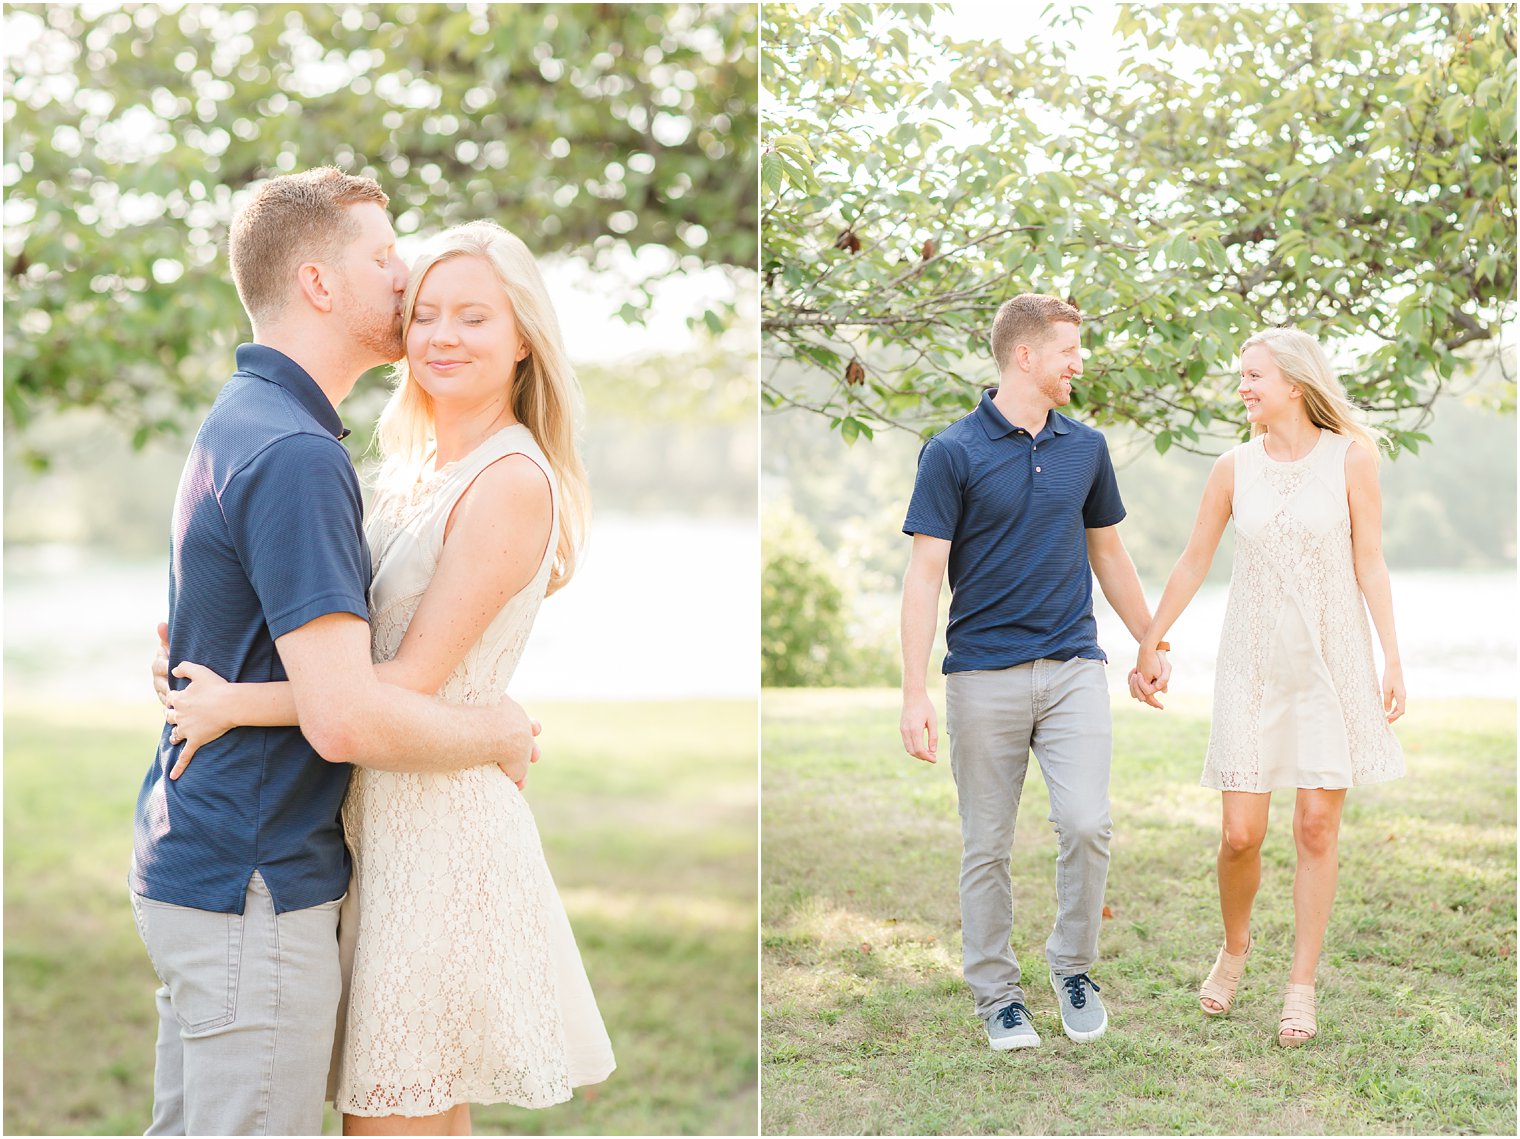 Light and airy NJ photographer in Central Nj